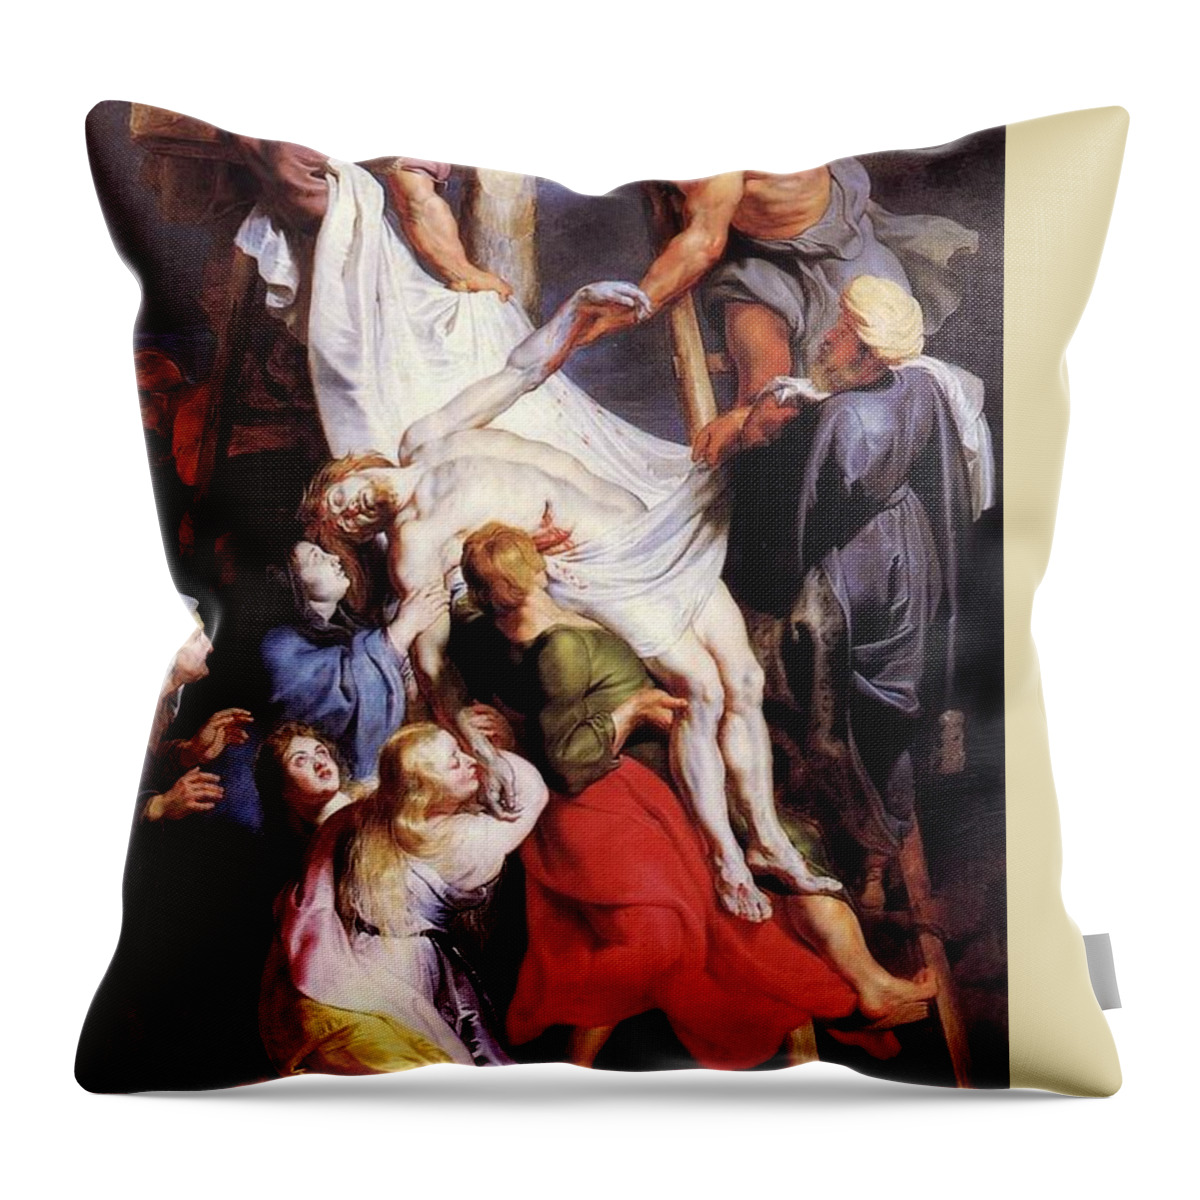 Descent Throw Pillow featuring the painting Descent From The Cross by Troy Caperton